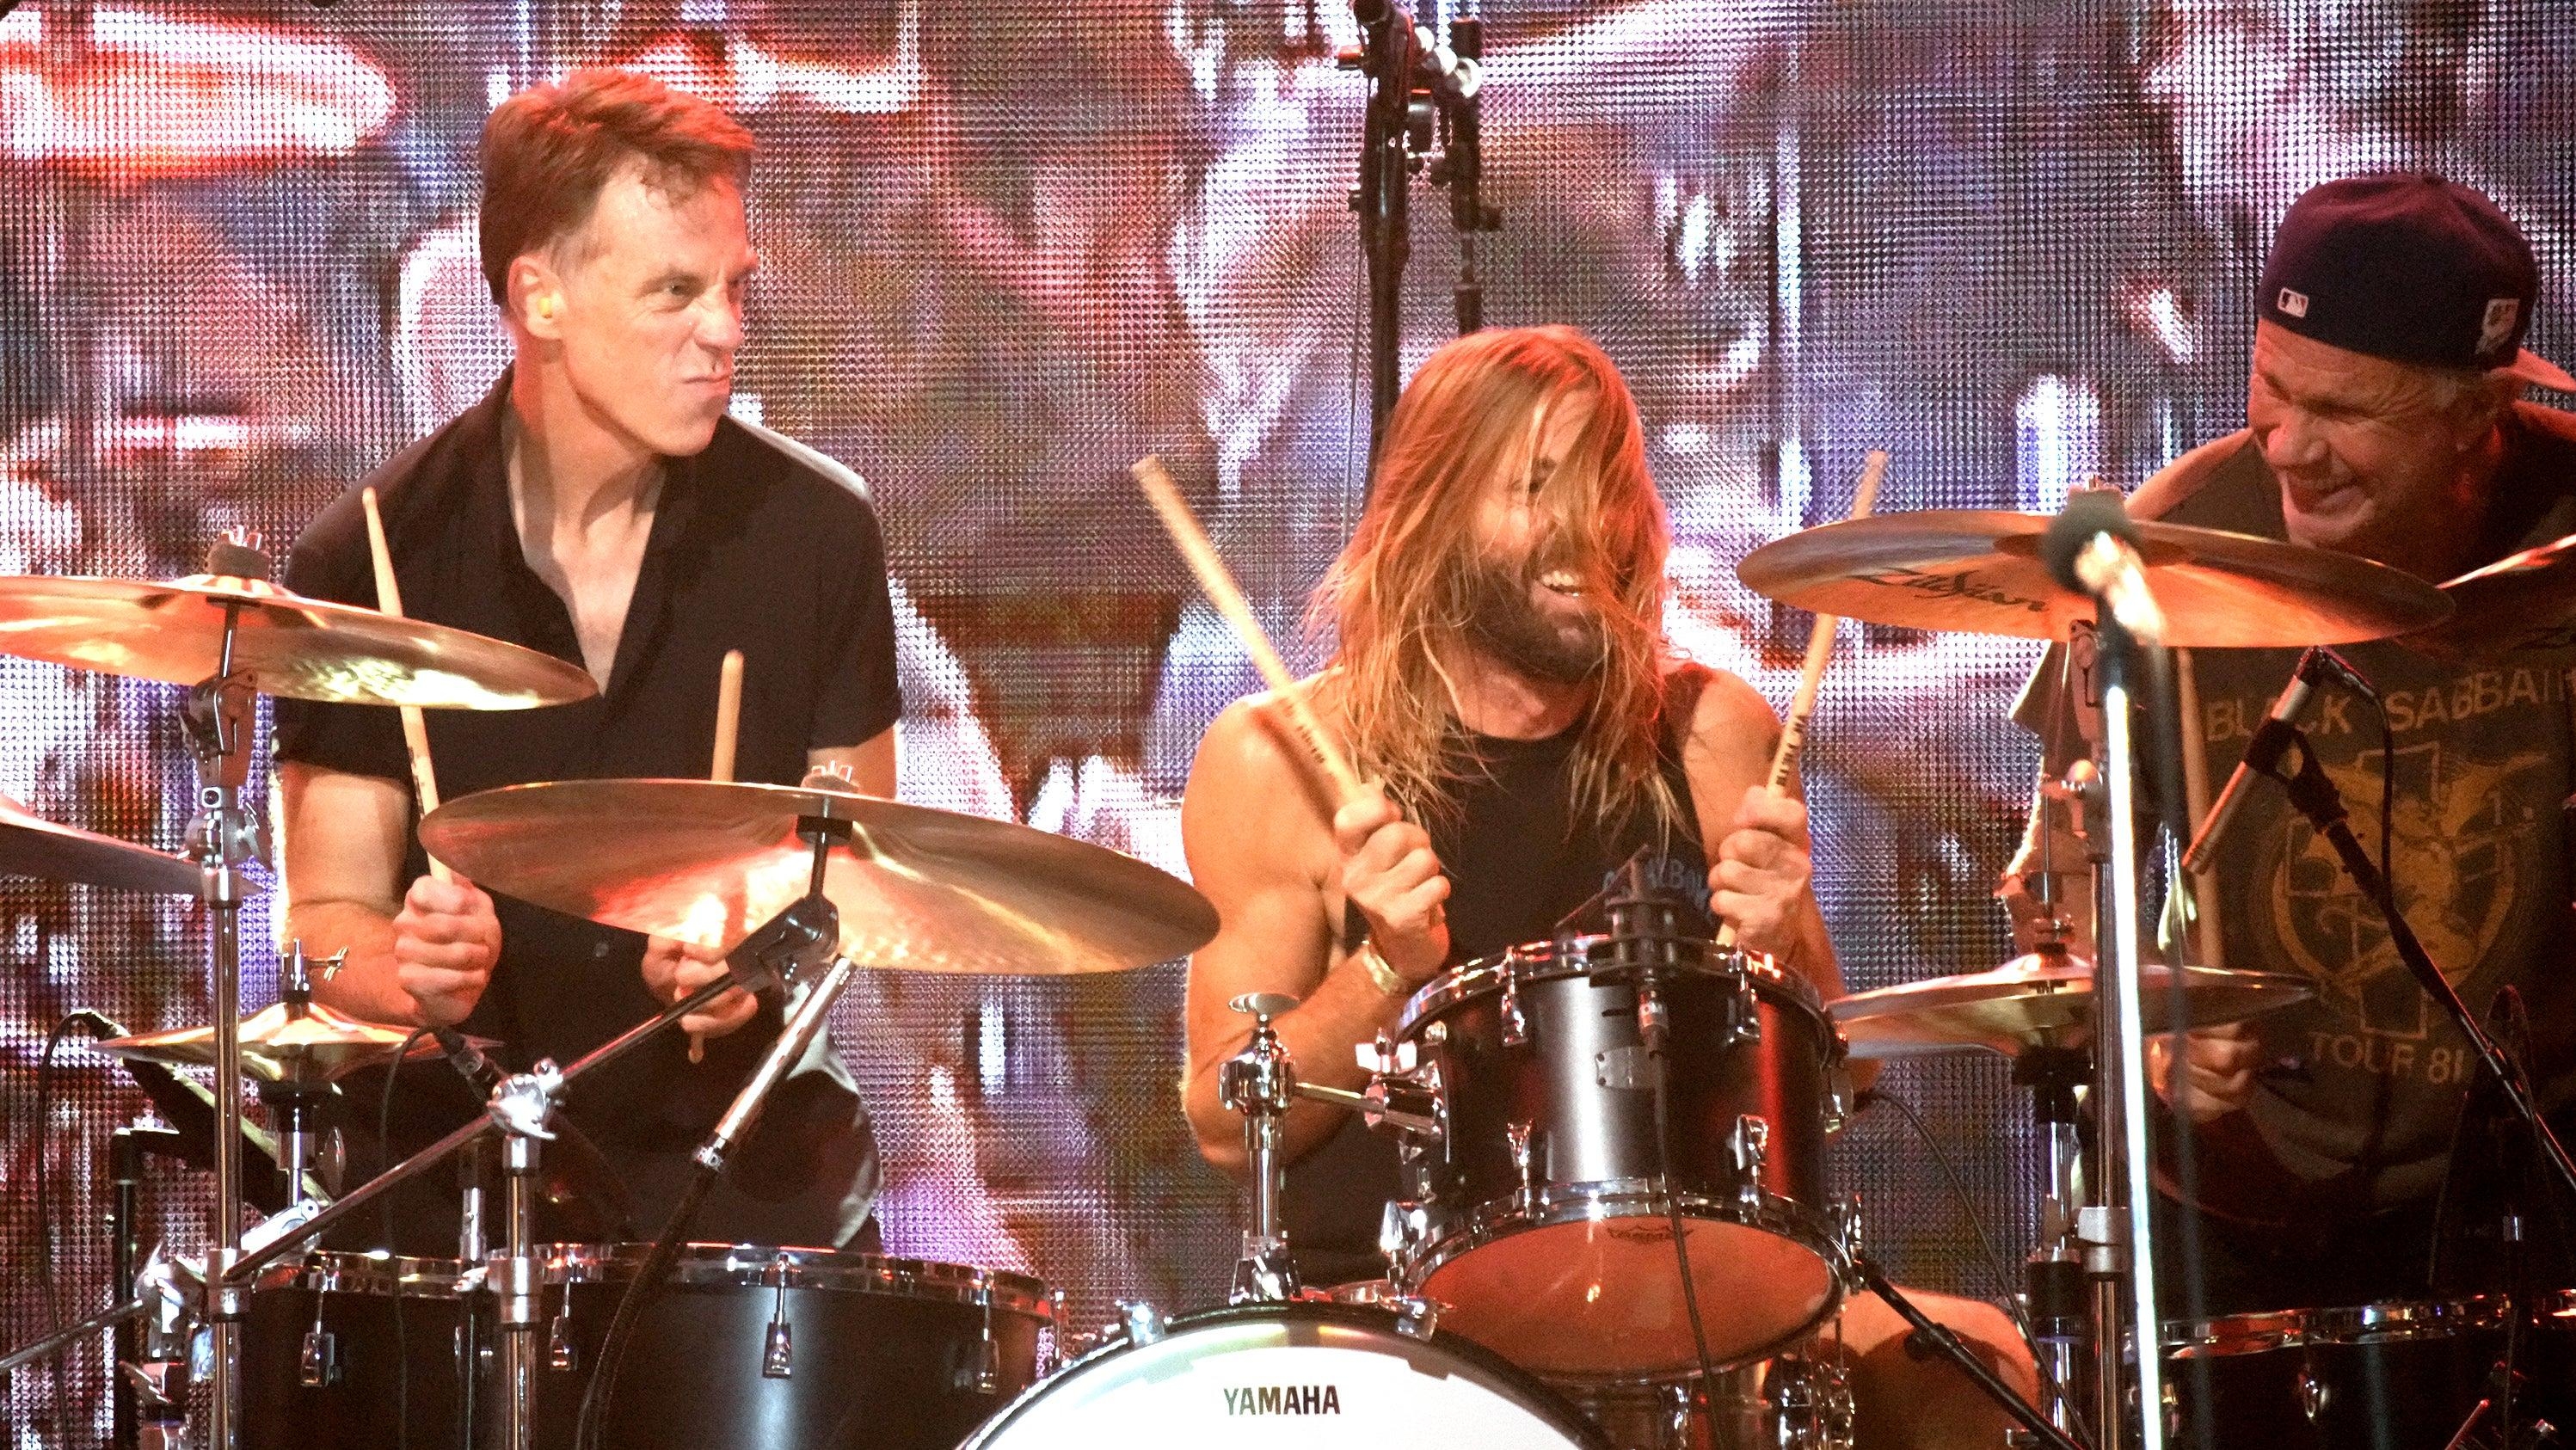 Matt Cameron and Chad Smith apologize for “misleading” quotes used in Taylor Hawkins article